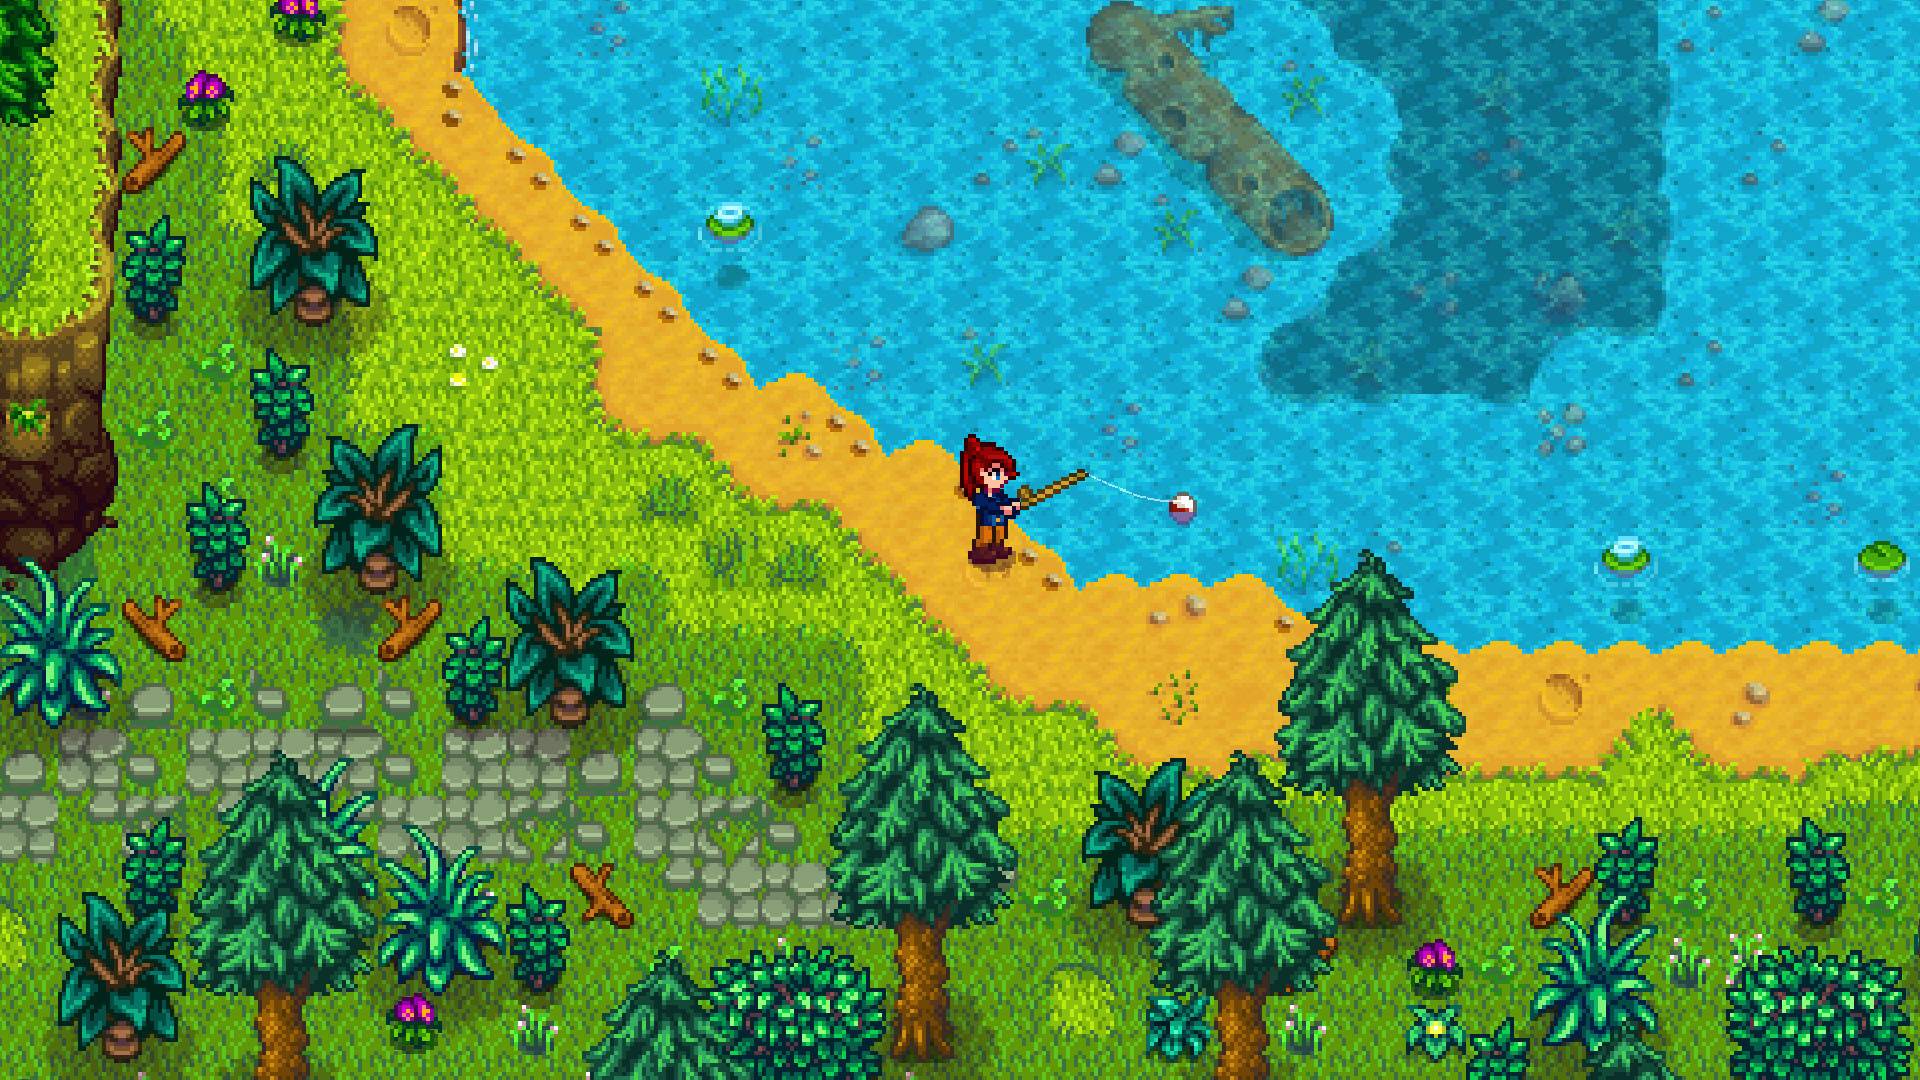 Best Nintendo Switch games: a pixelated scene shows a character stoodin a meadow, ready to fish in a lake 